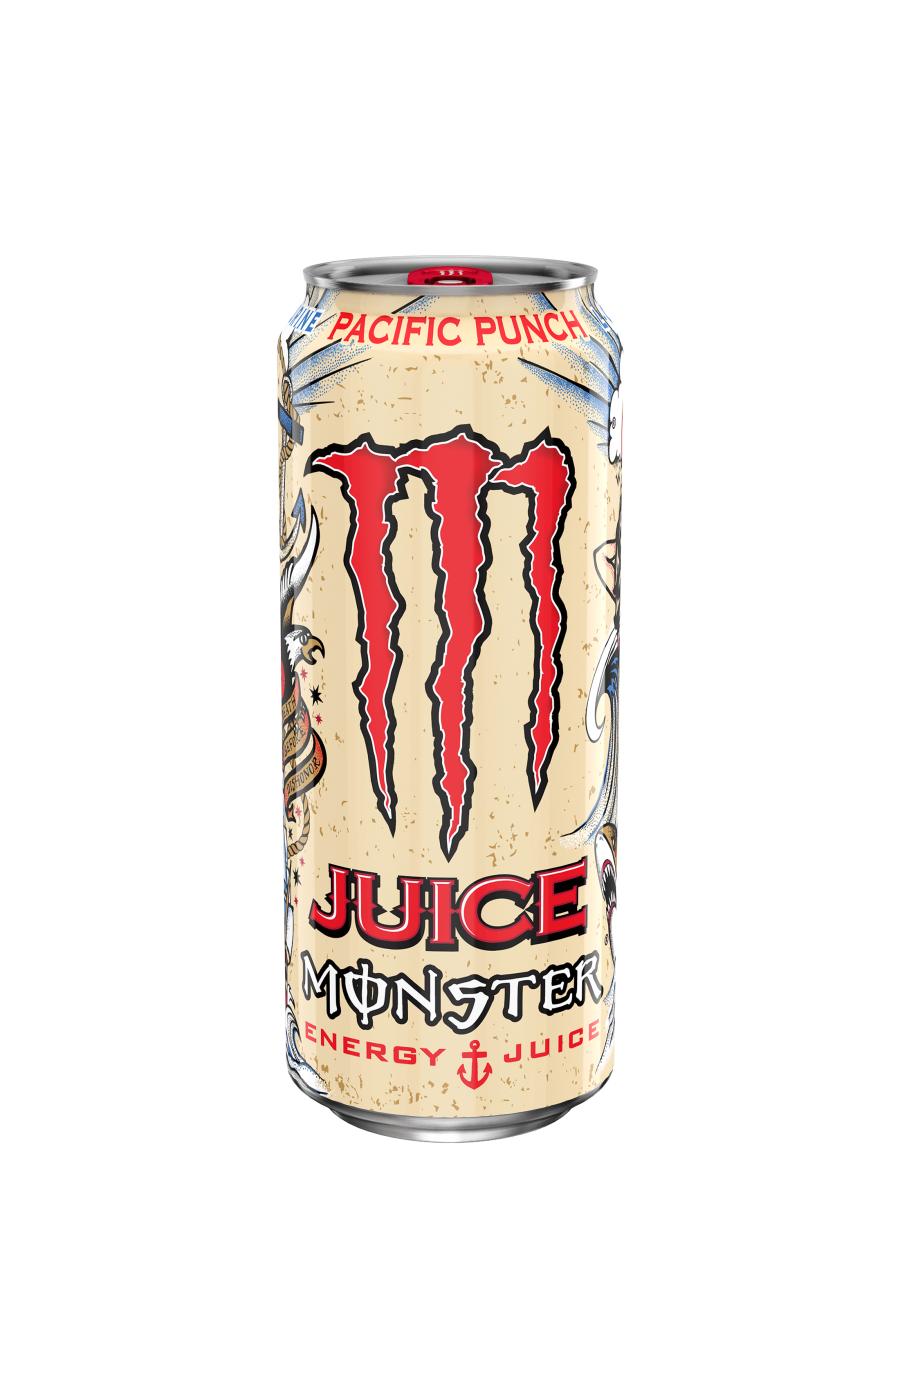 Monster Energy Juice Monster Pacific Punch, Energy + Juice; image 1 of 2